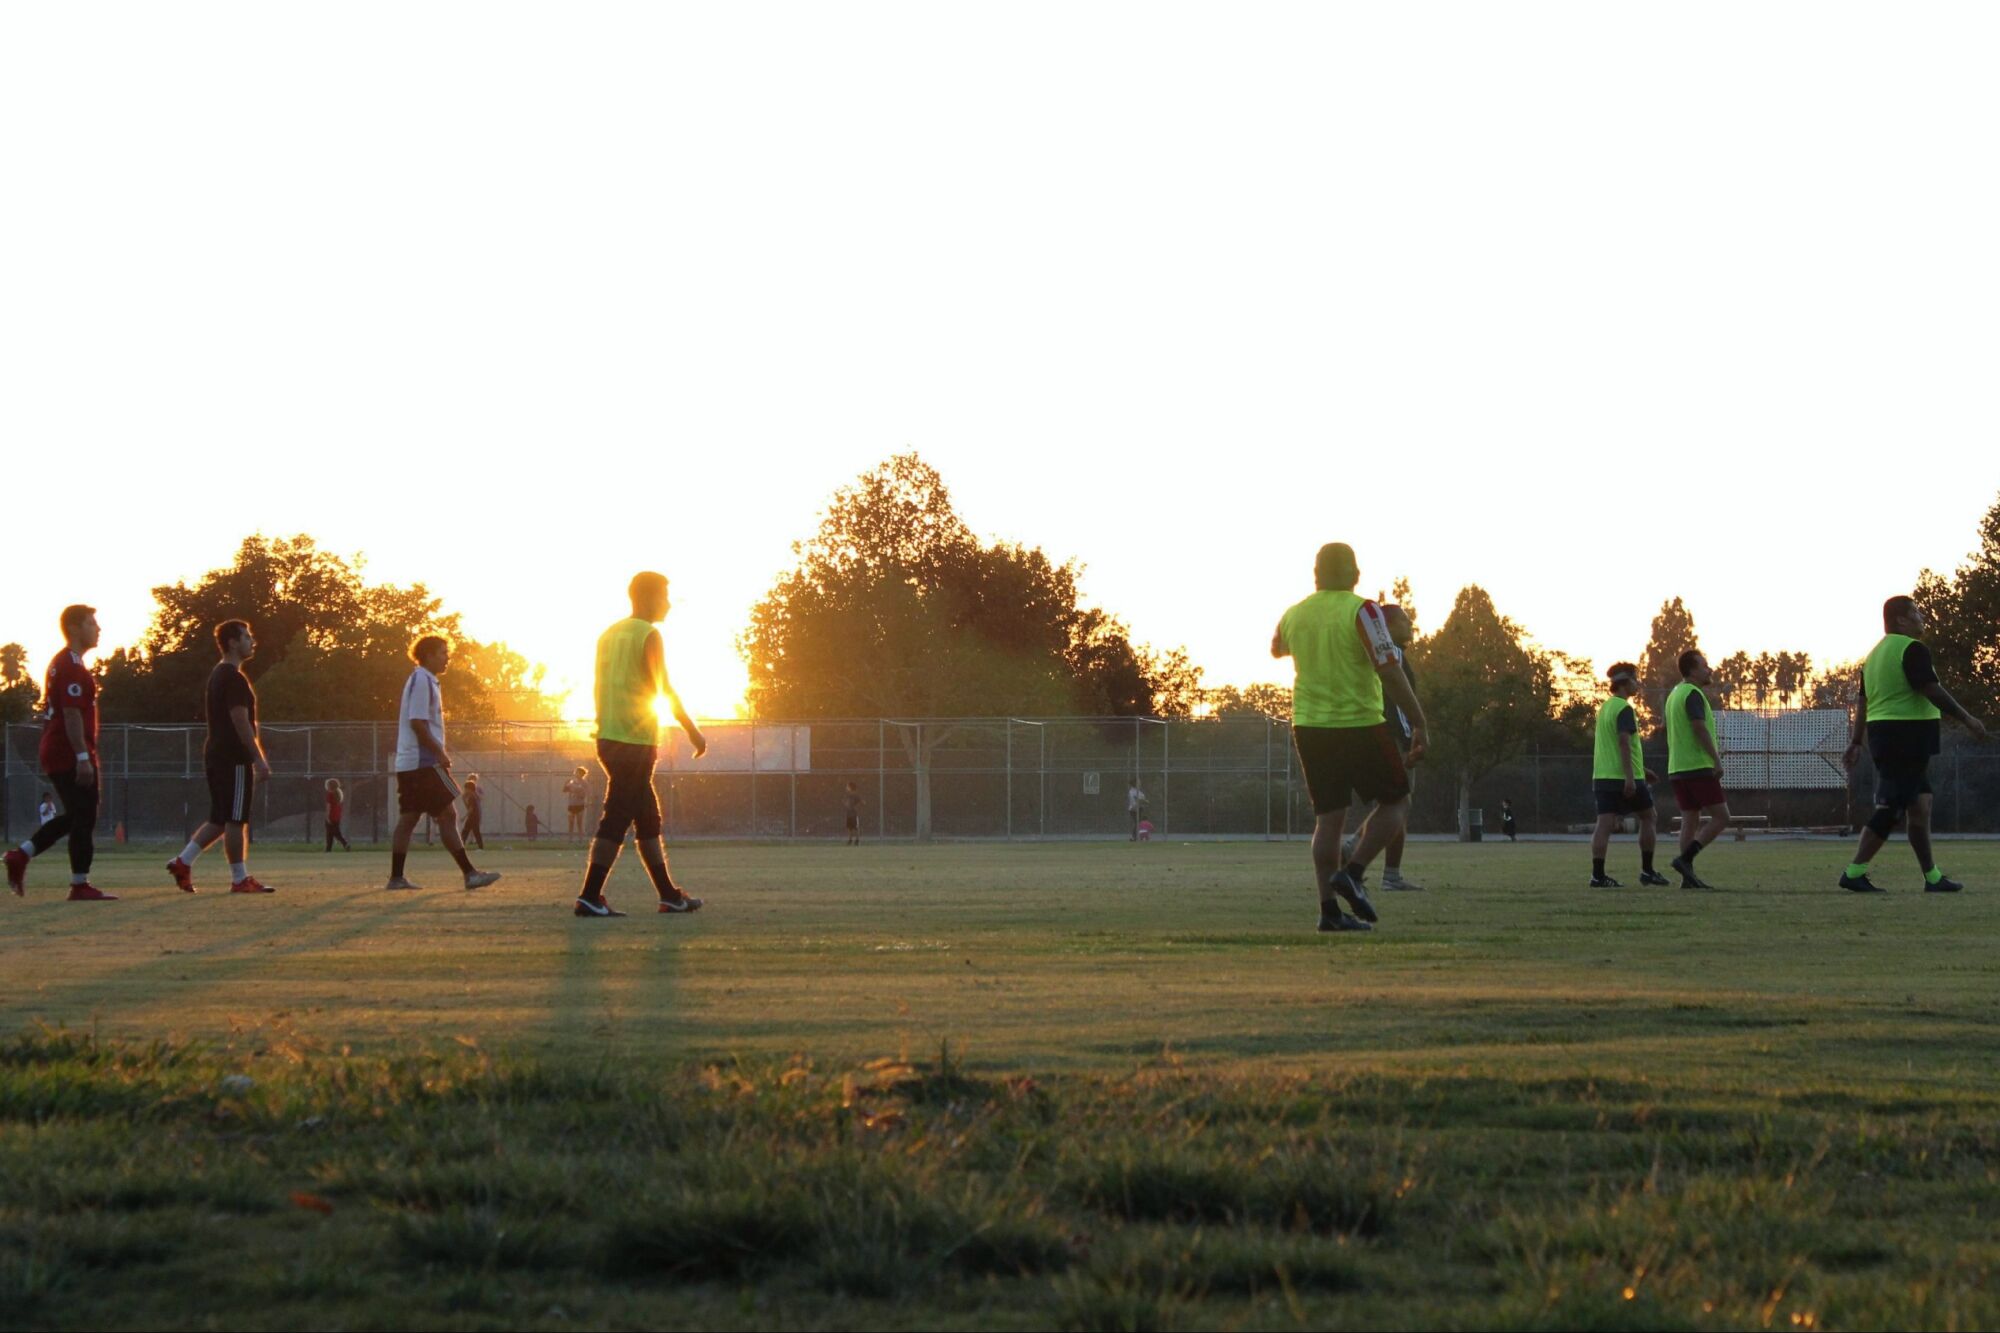 The sun sets on the horizon as the players wrap up their game. Photos by Adria Marin, a student with Las Fotos.